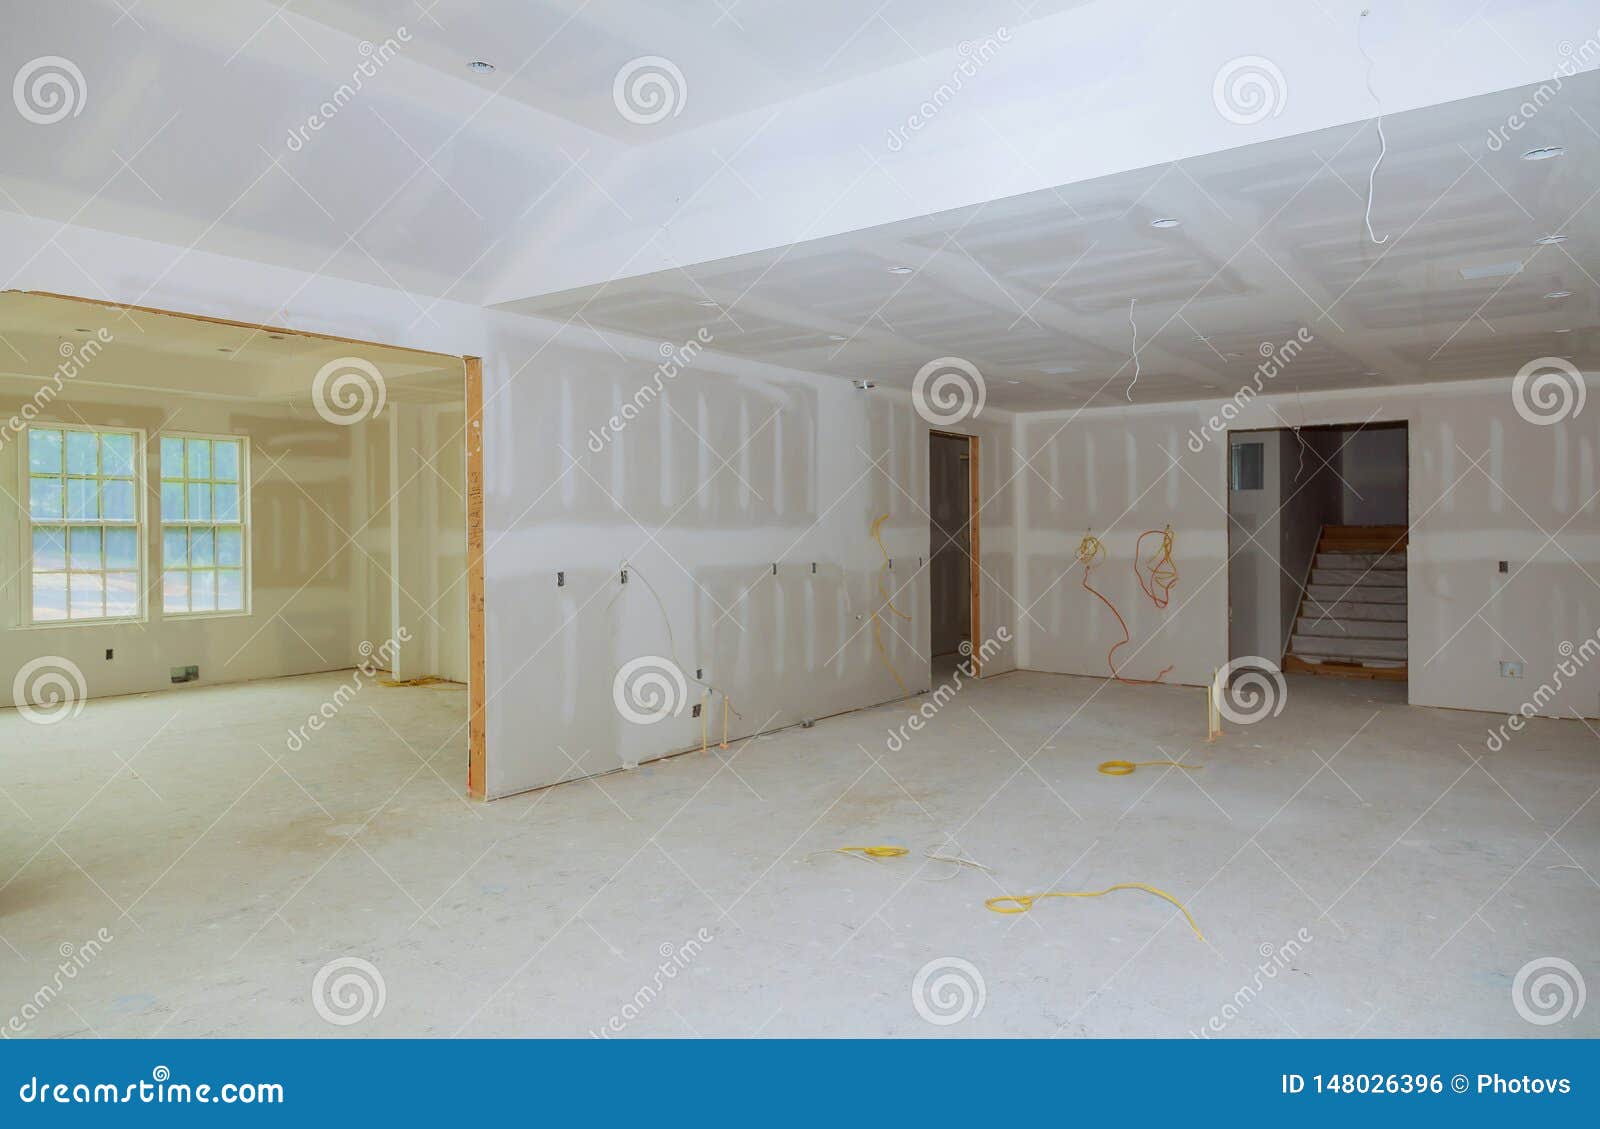 Drywall Tape Construction Building Industry New Home Construction